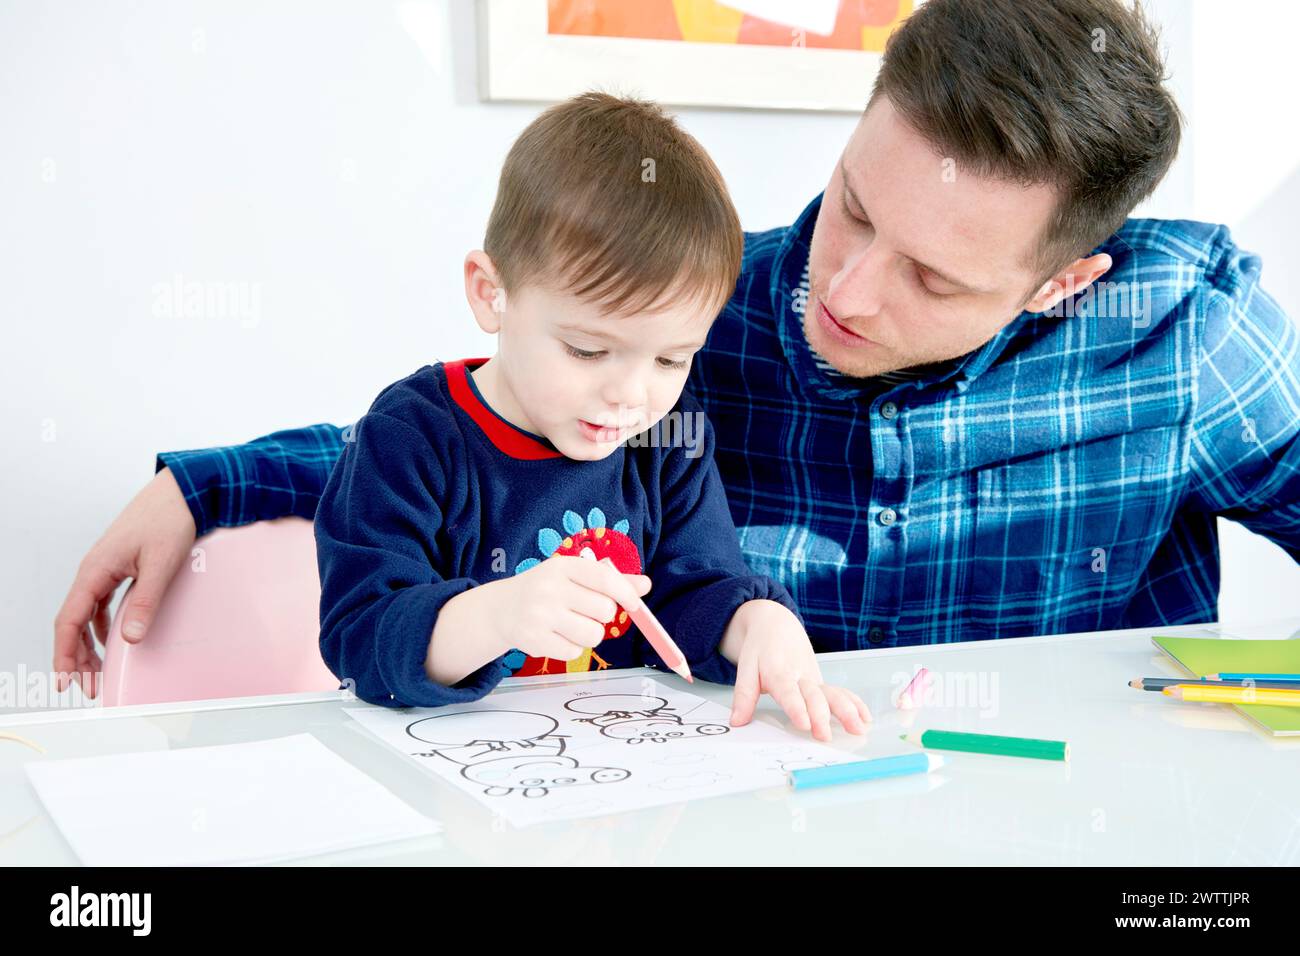 Adult assisting a child with coloring at a table. Stock Photo